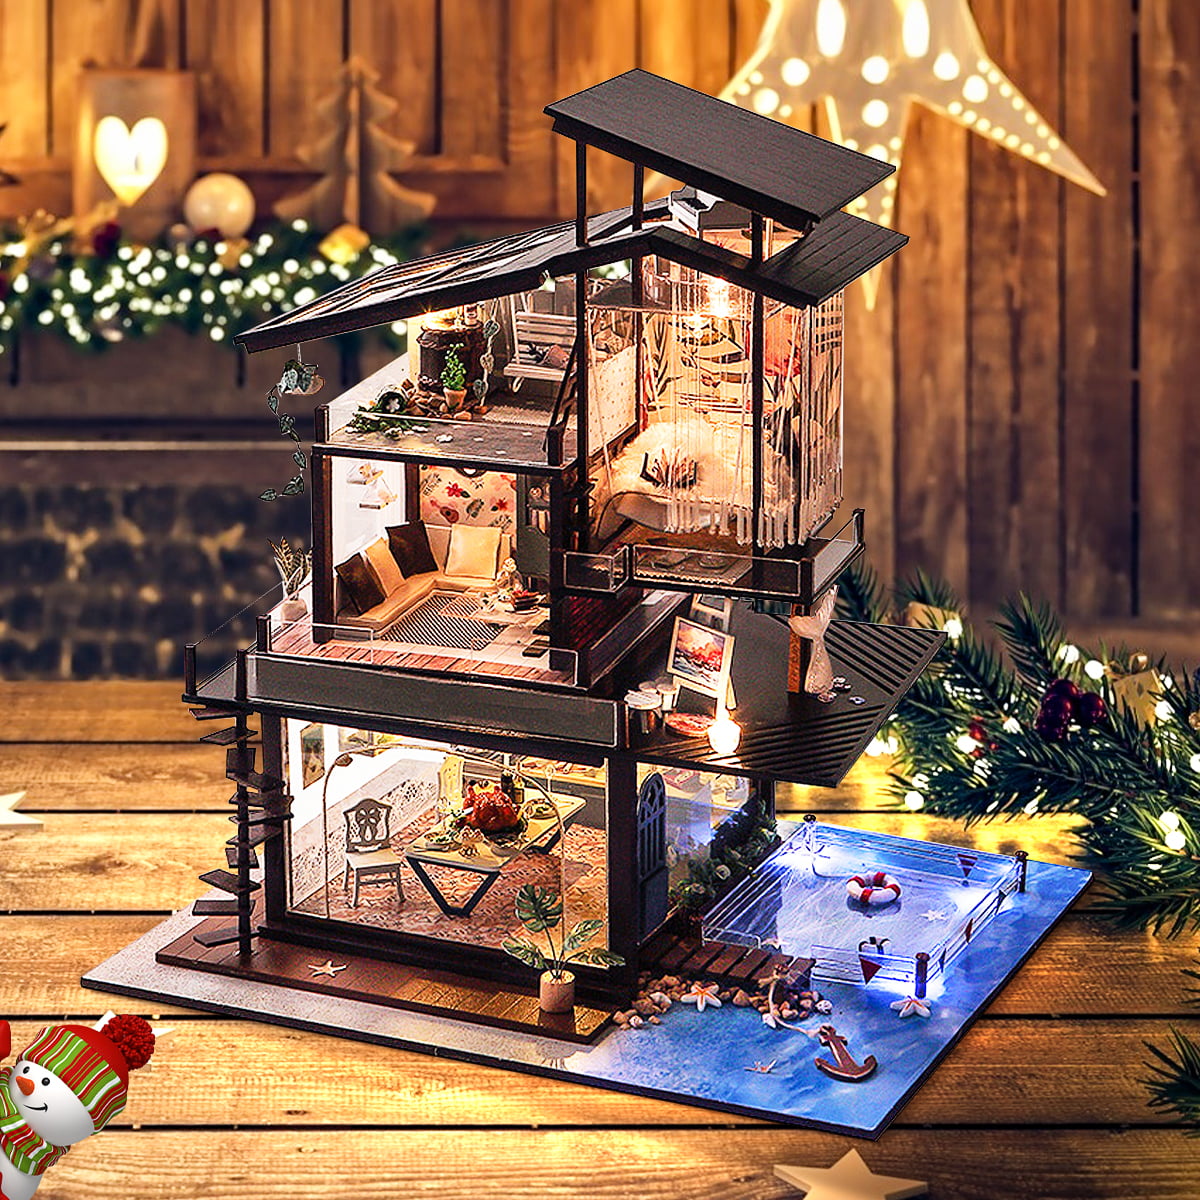 Wooden DIY Dollhouse With Dustcover Miniature Villa Apartment Assembling Decorative Dollhouse Toy for Children Home Decoration